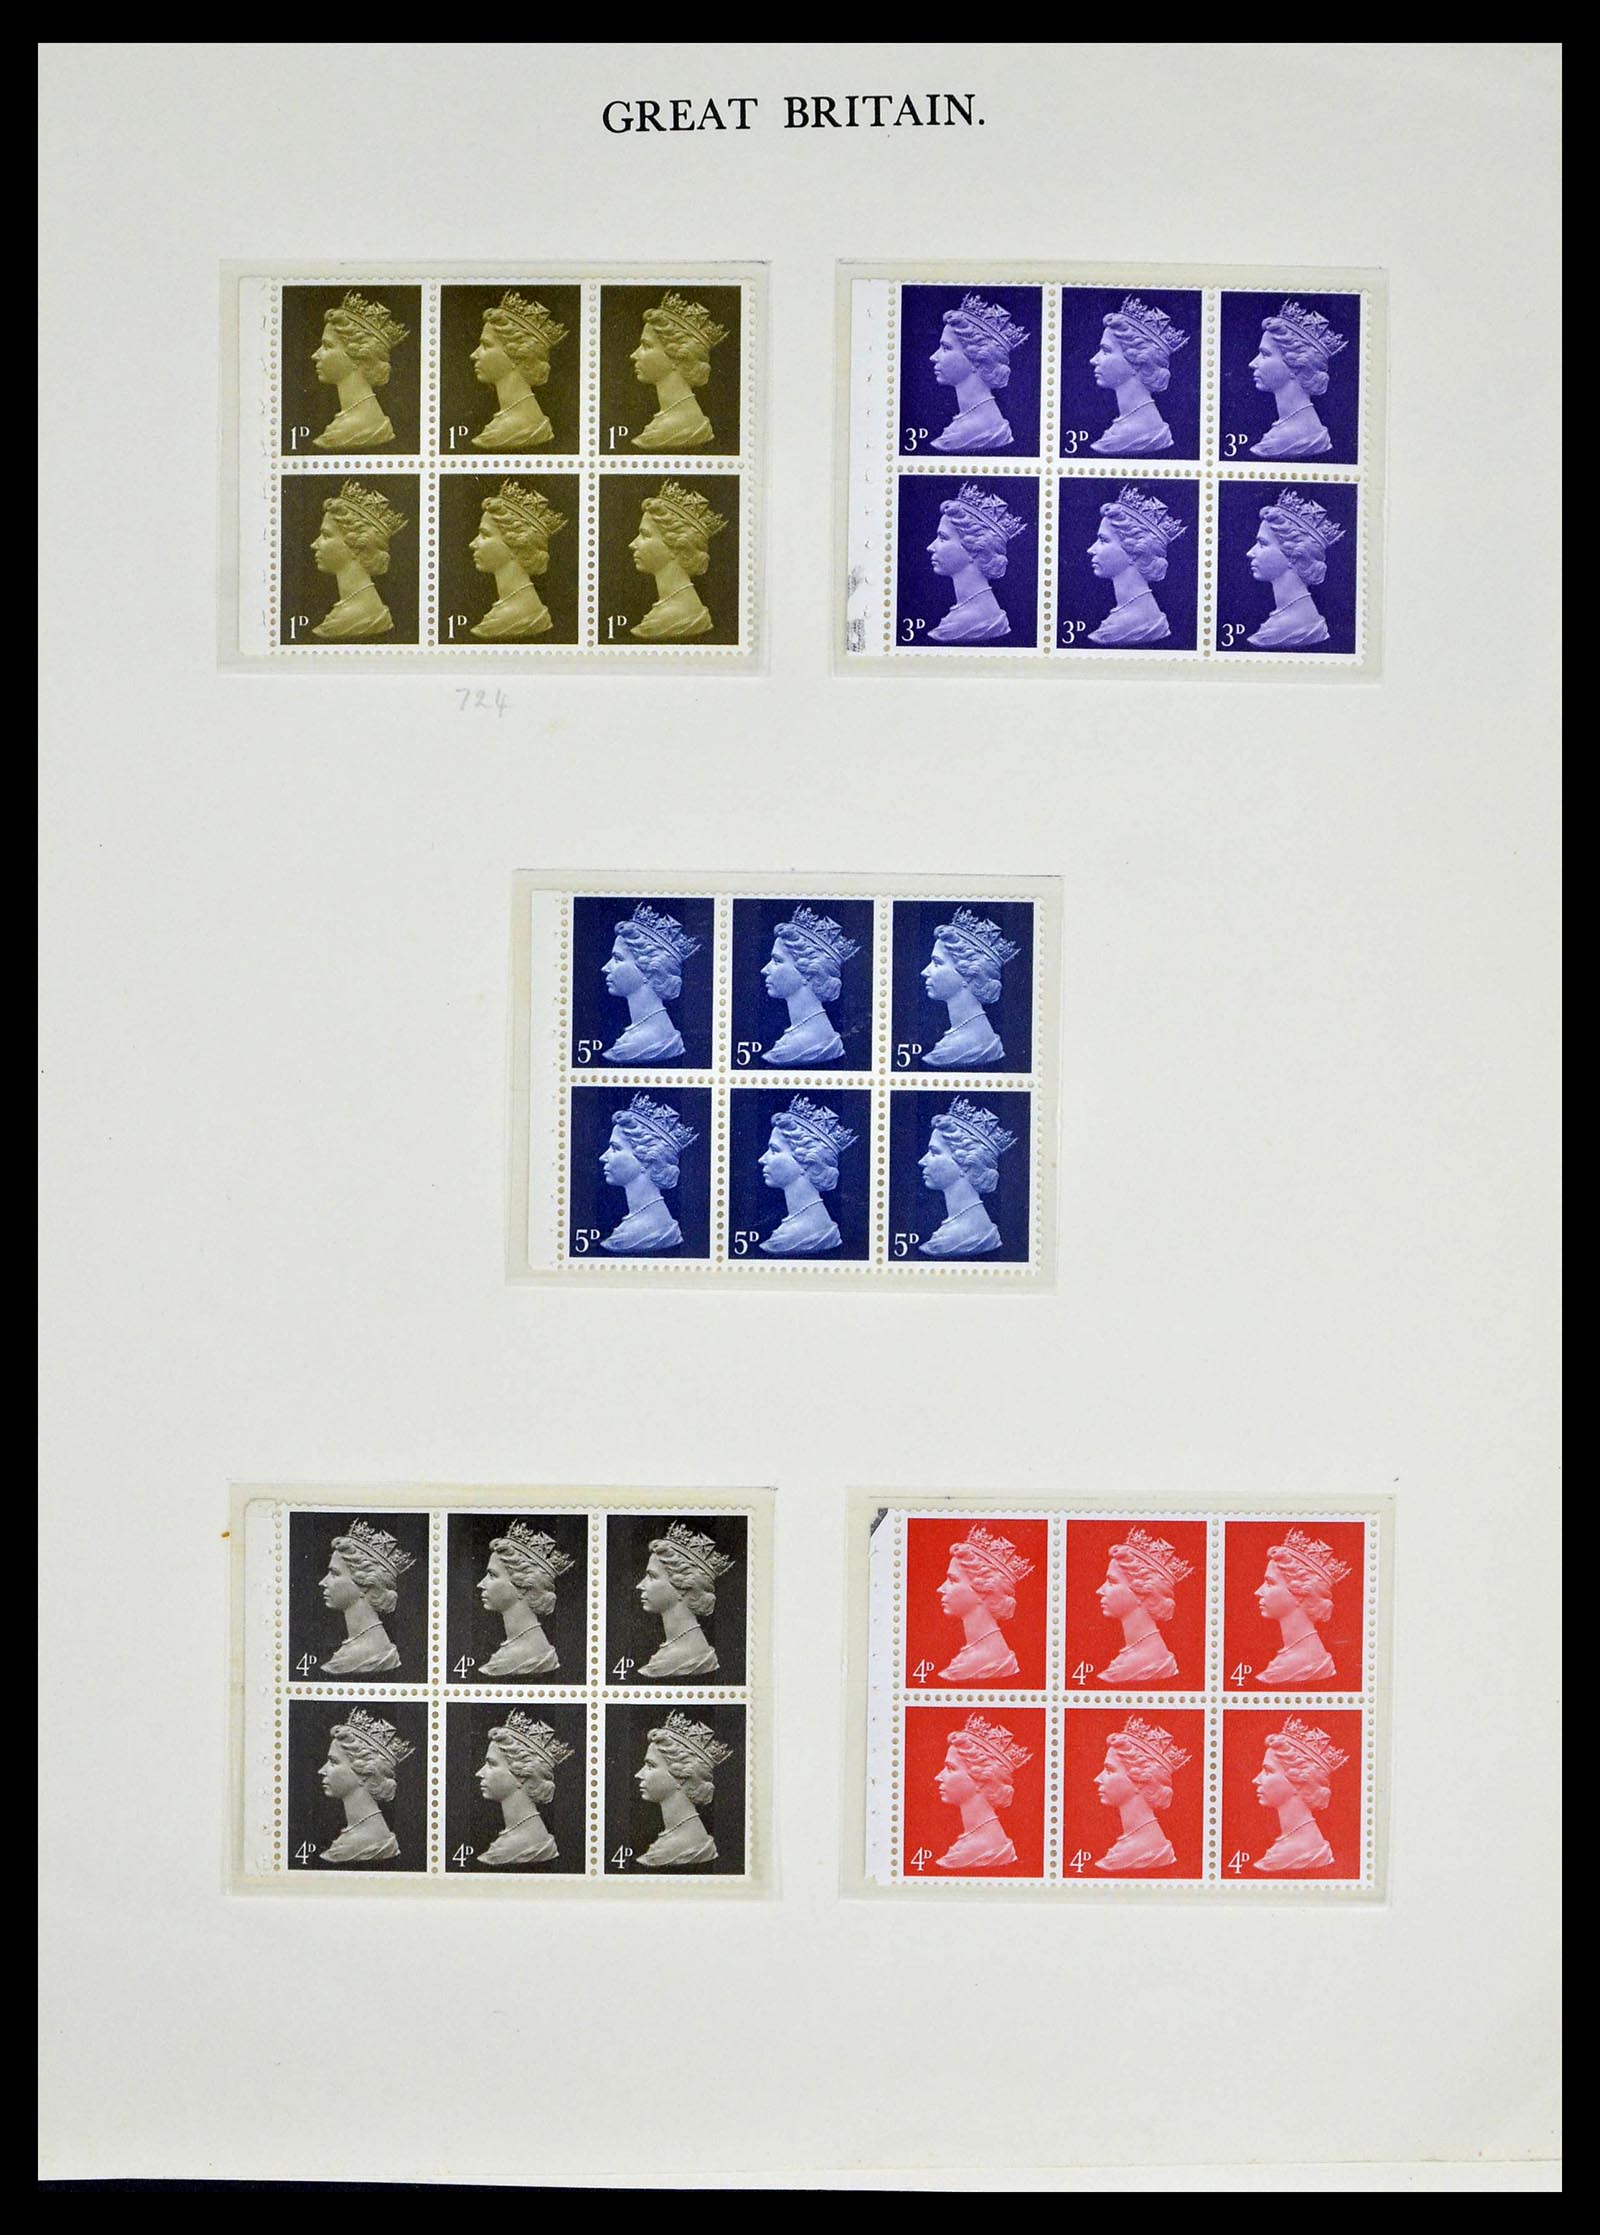 39025 0048 - Stamp collection 39025 Great Britain specialised 1840-1990.